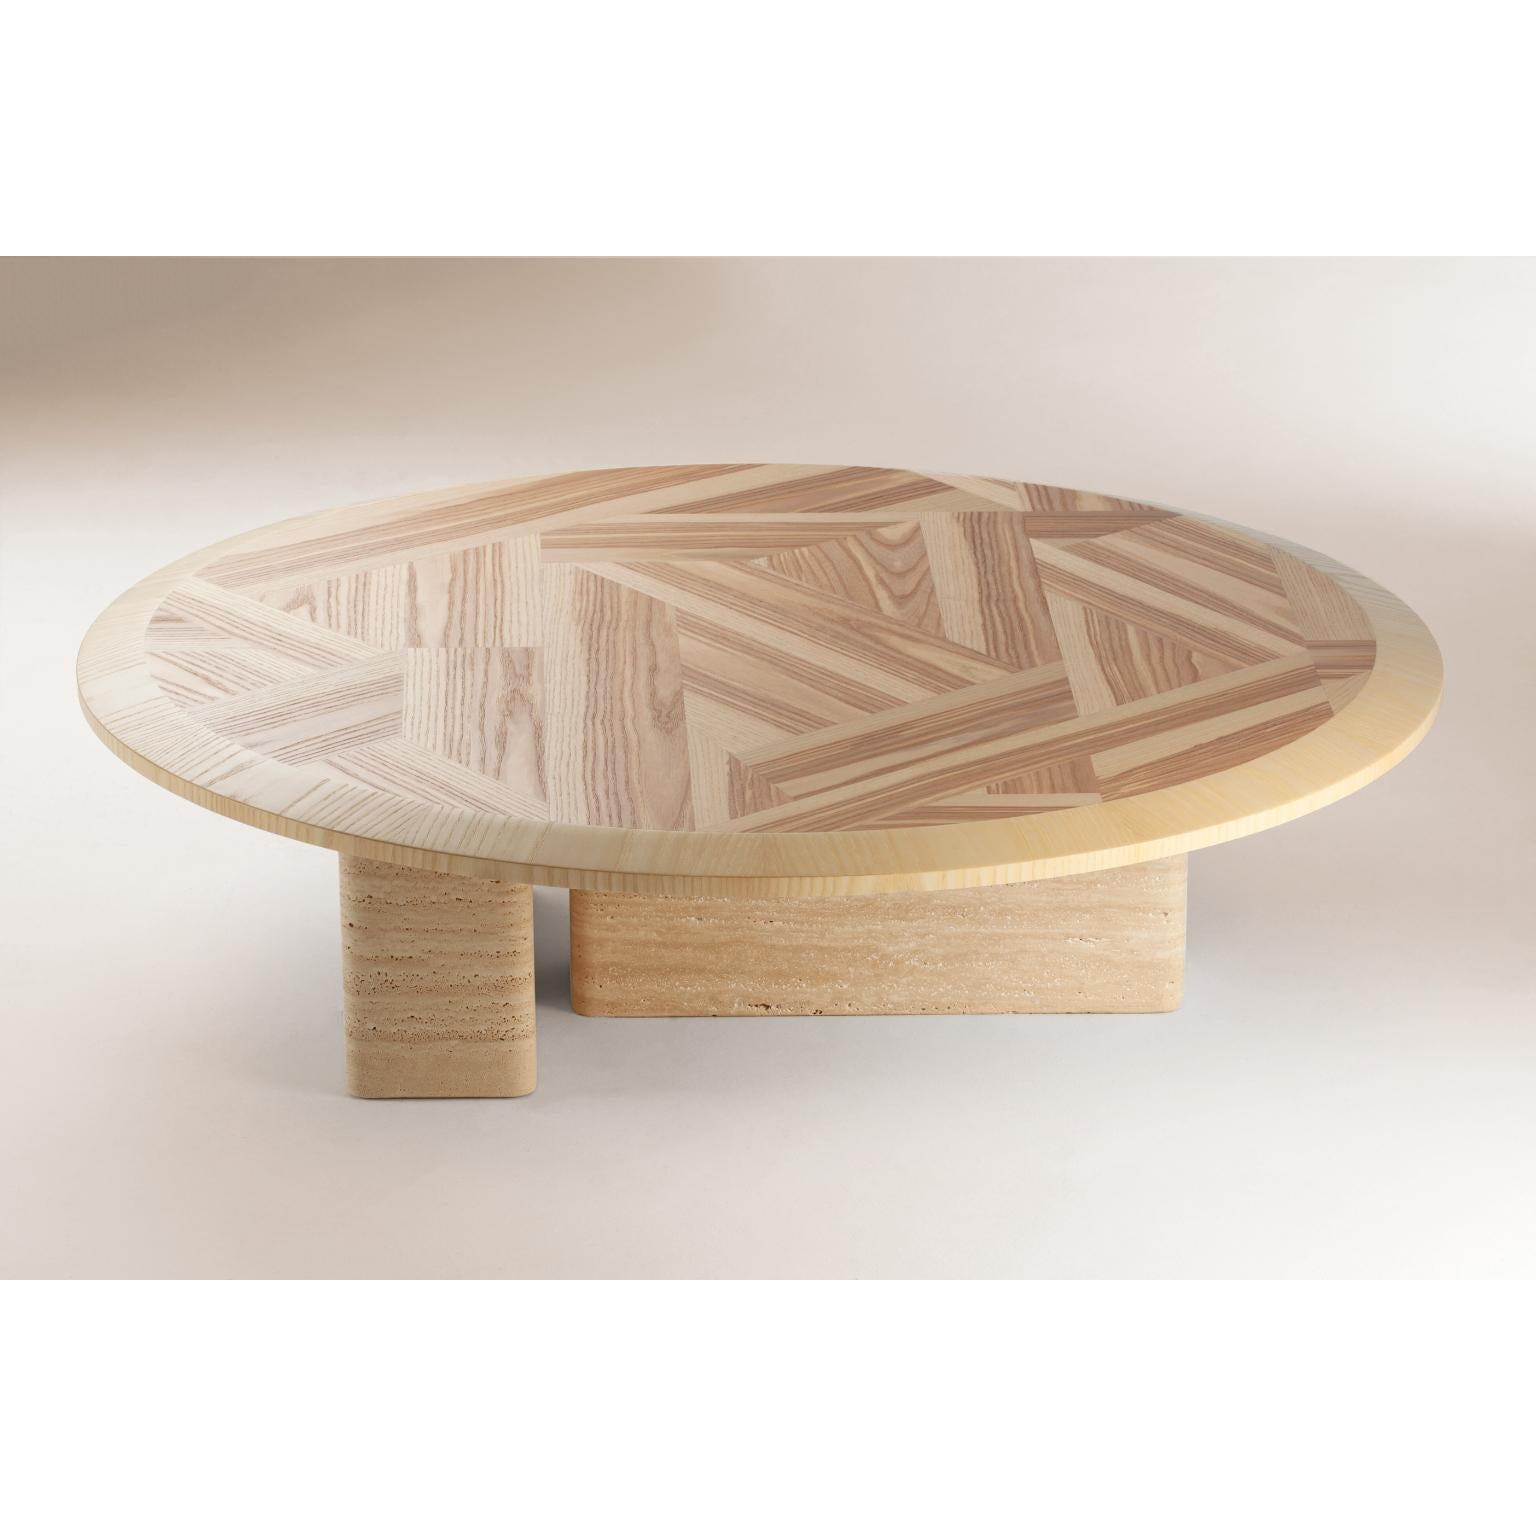 L’anamour center table by Dooq
Dimensions: D 110 x W 110 x H 30 cm
Materials: 
Top: Natural or nude olive ash
Base: Natural travertine or nude lacquered wood

Other options available.

L’anamour is a set of coffee and side tables, which